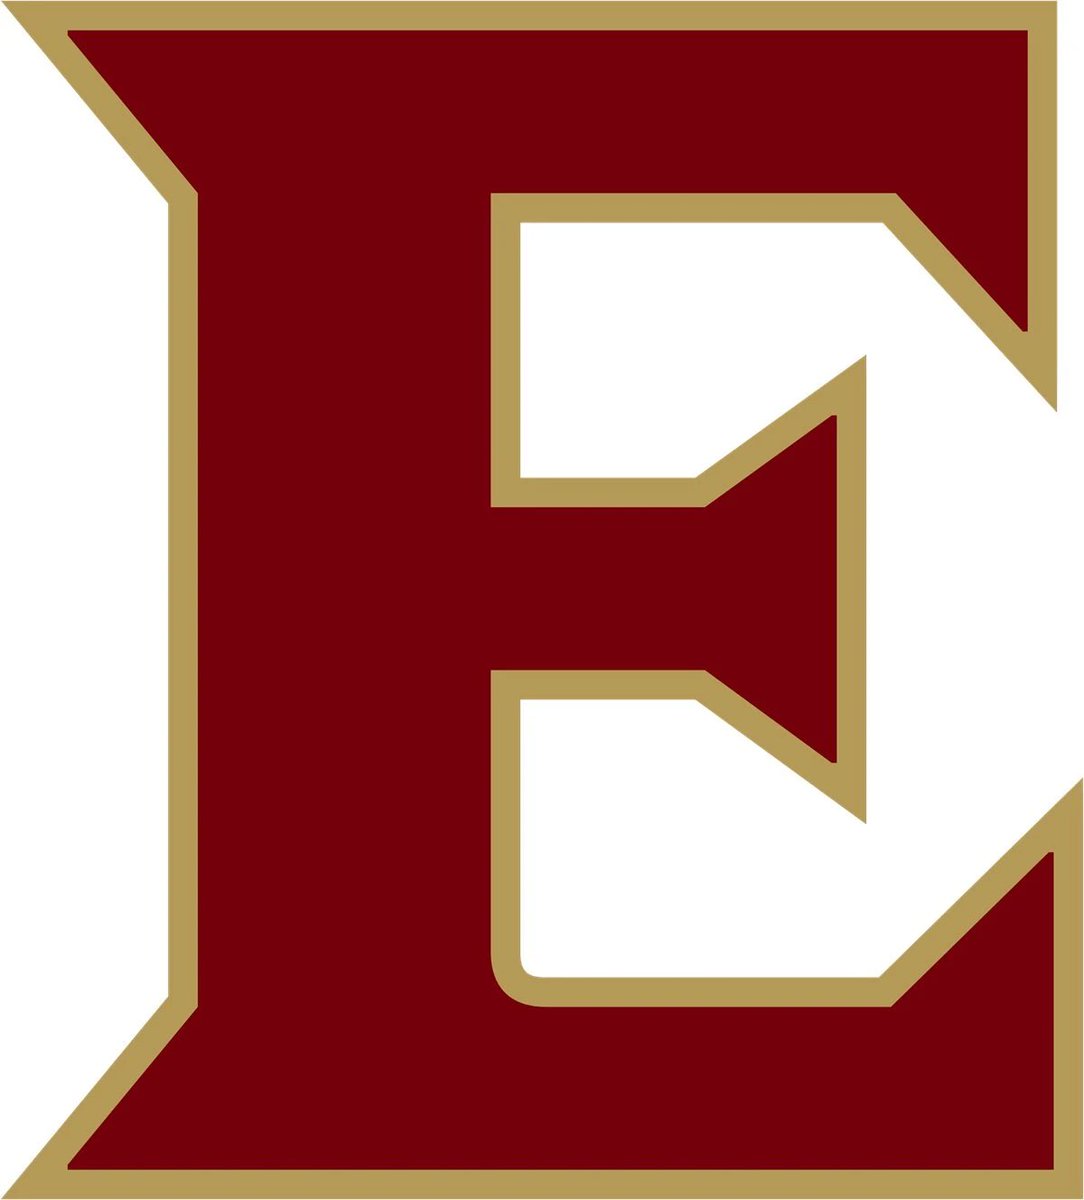 All Glory to God! After a great conversation with @Coach___E I am blessed to receive an opportunity to continue my education and playing career @ElonFootball!! @TonyTrisciani @Coach_Stad @CappsHal @CoachP_eterson